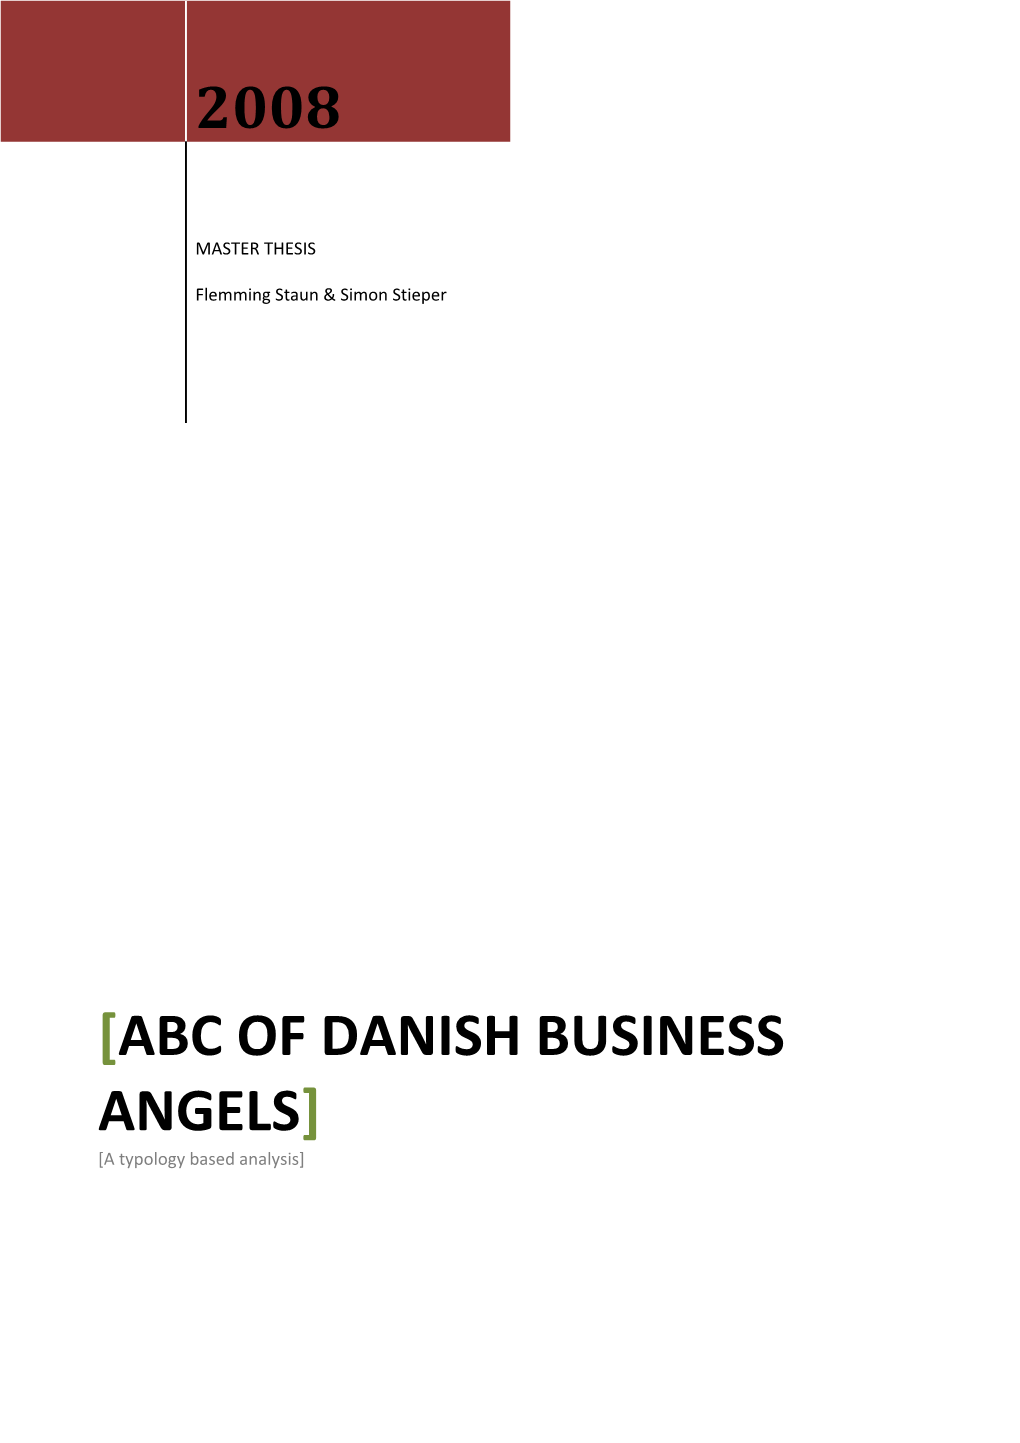 ABC of Danish Business Angels a Typology Based Analysis